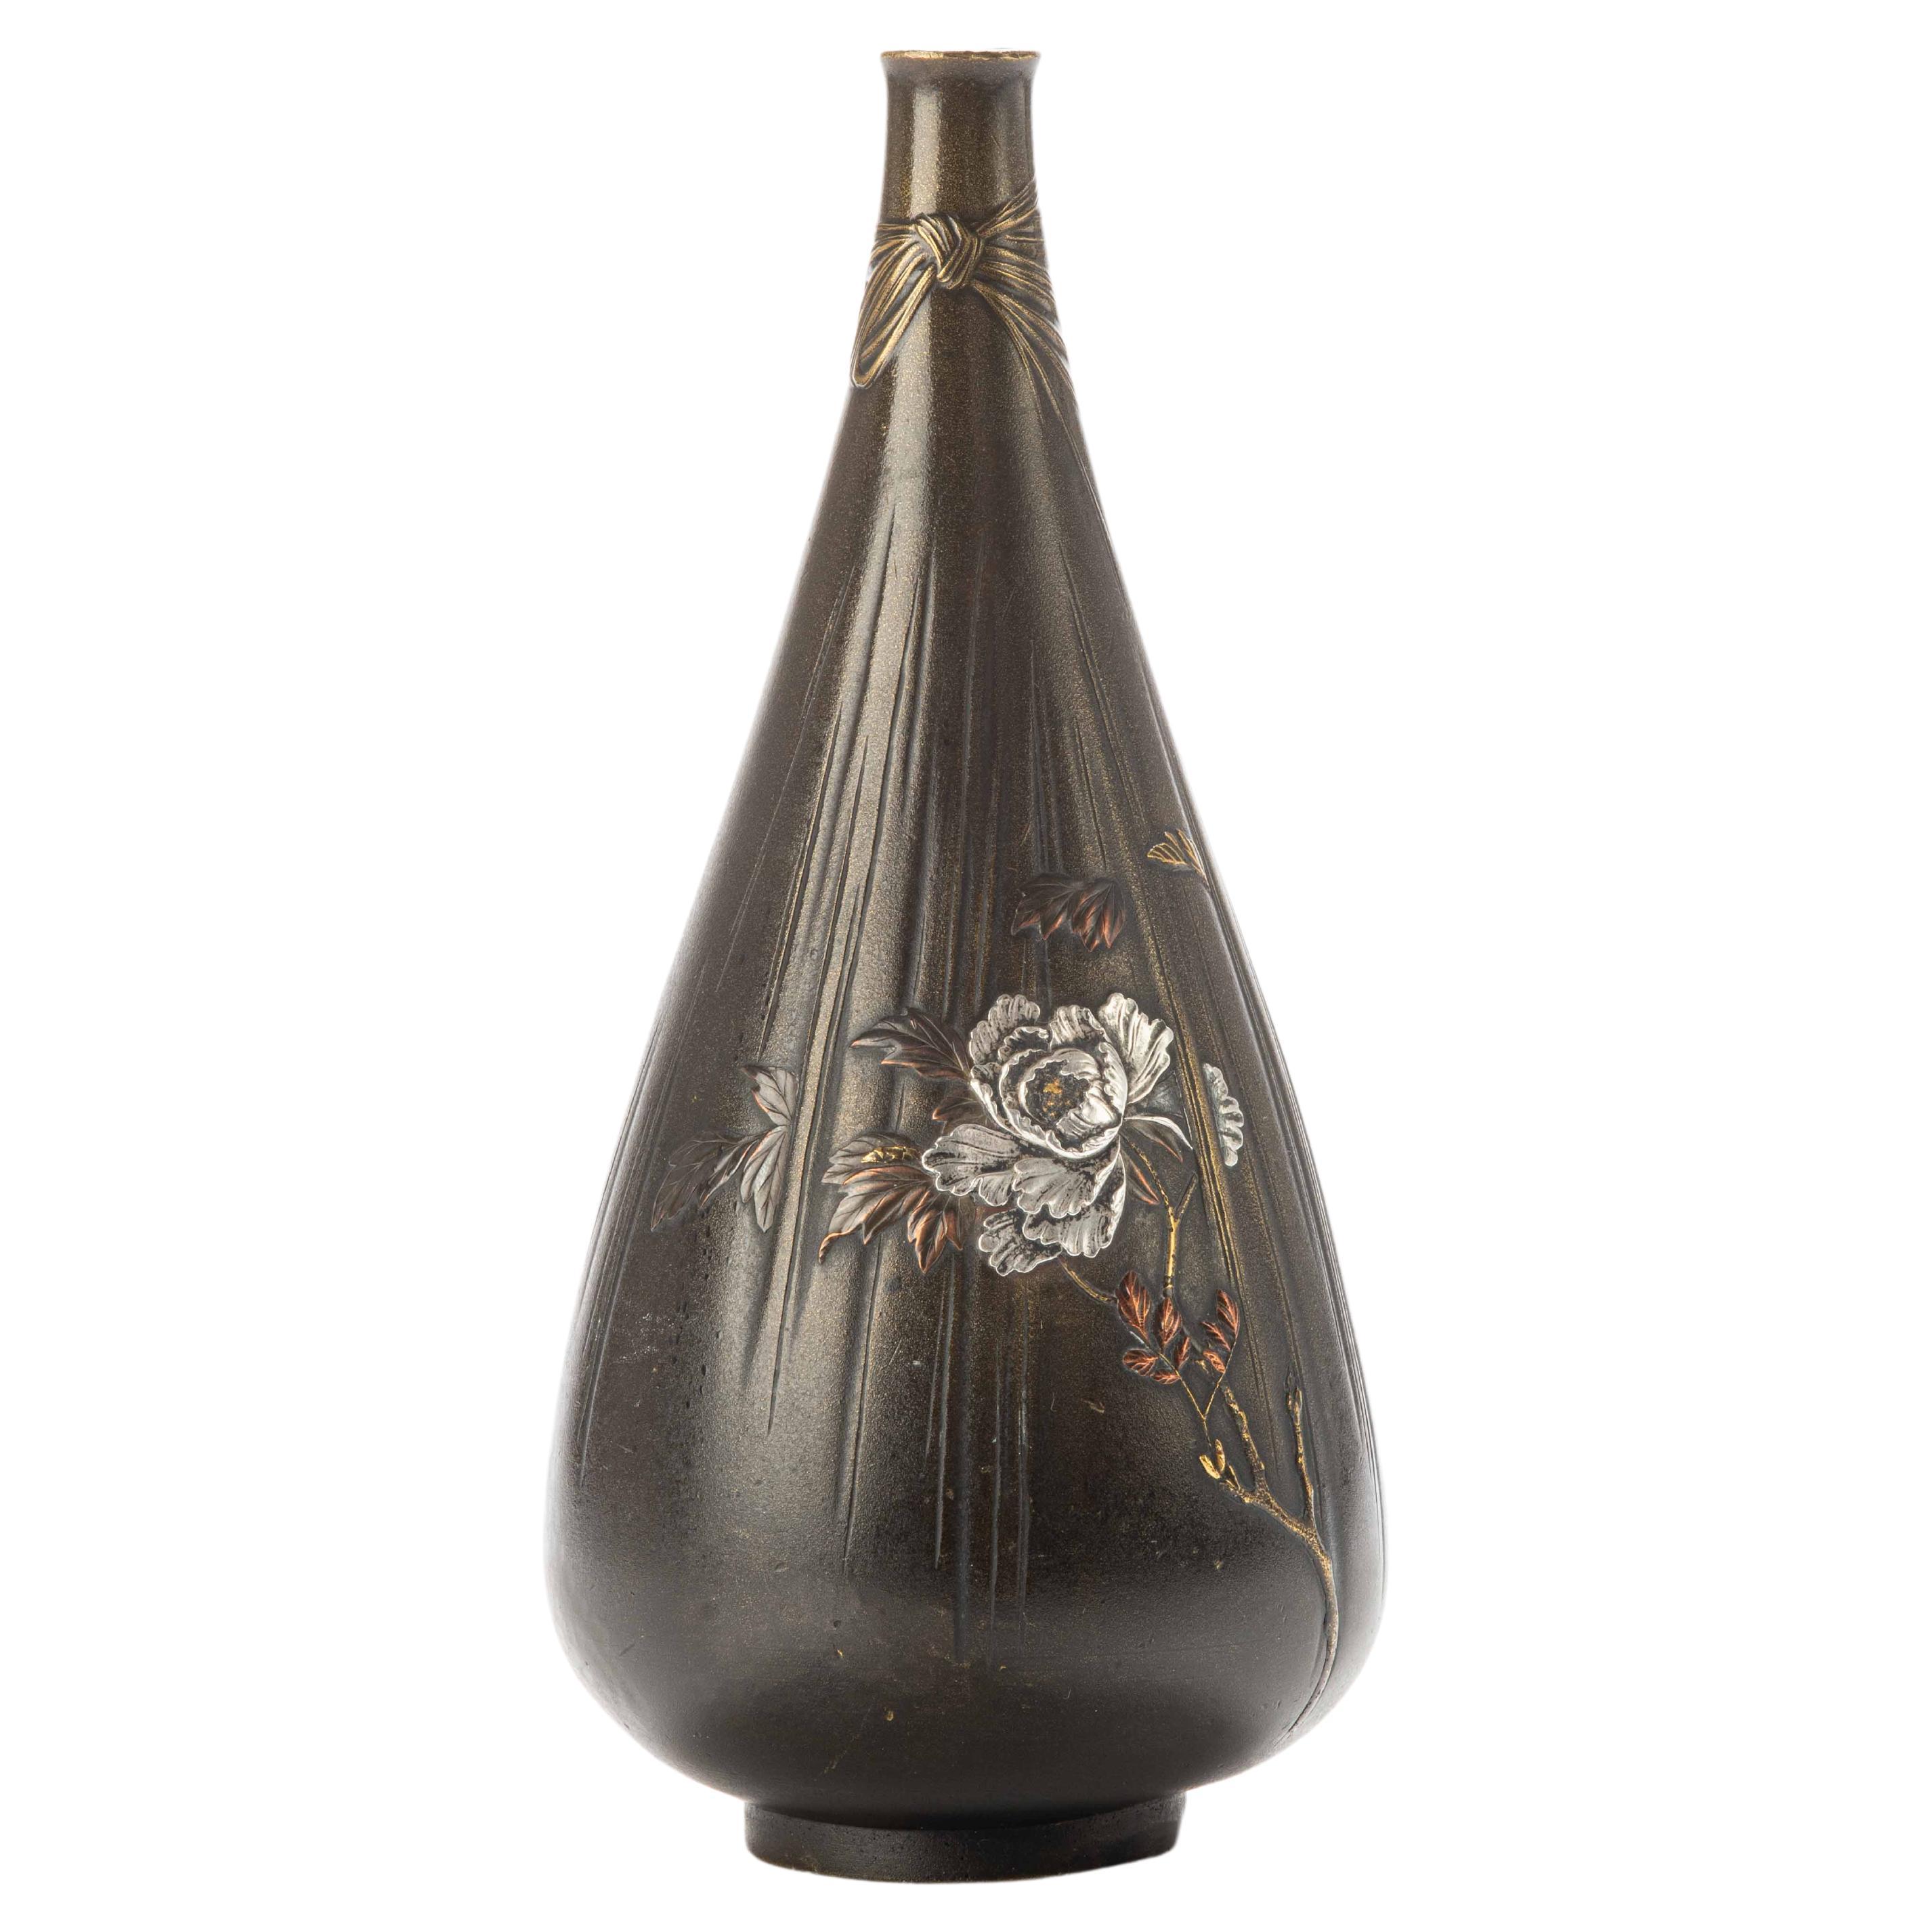 A Japanese drop-shaped bronze vase with peonies